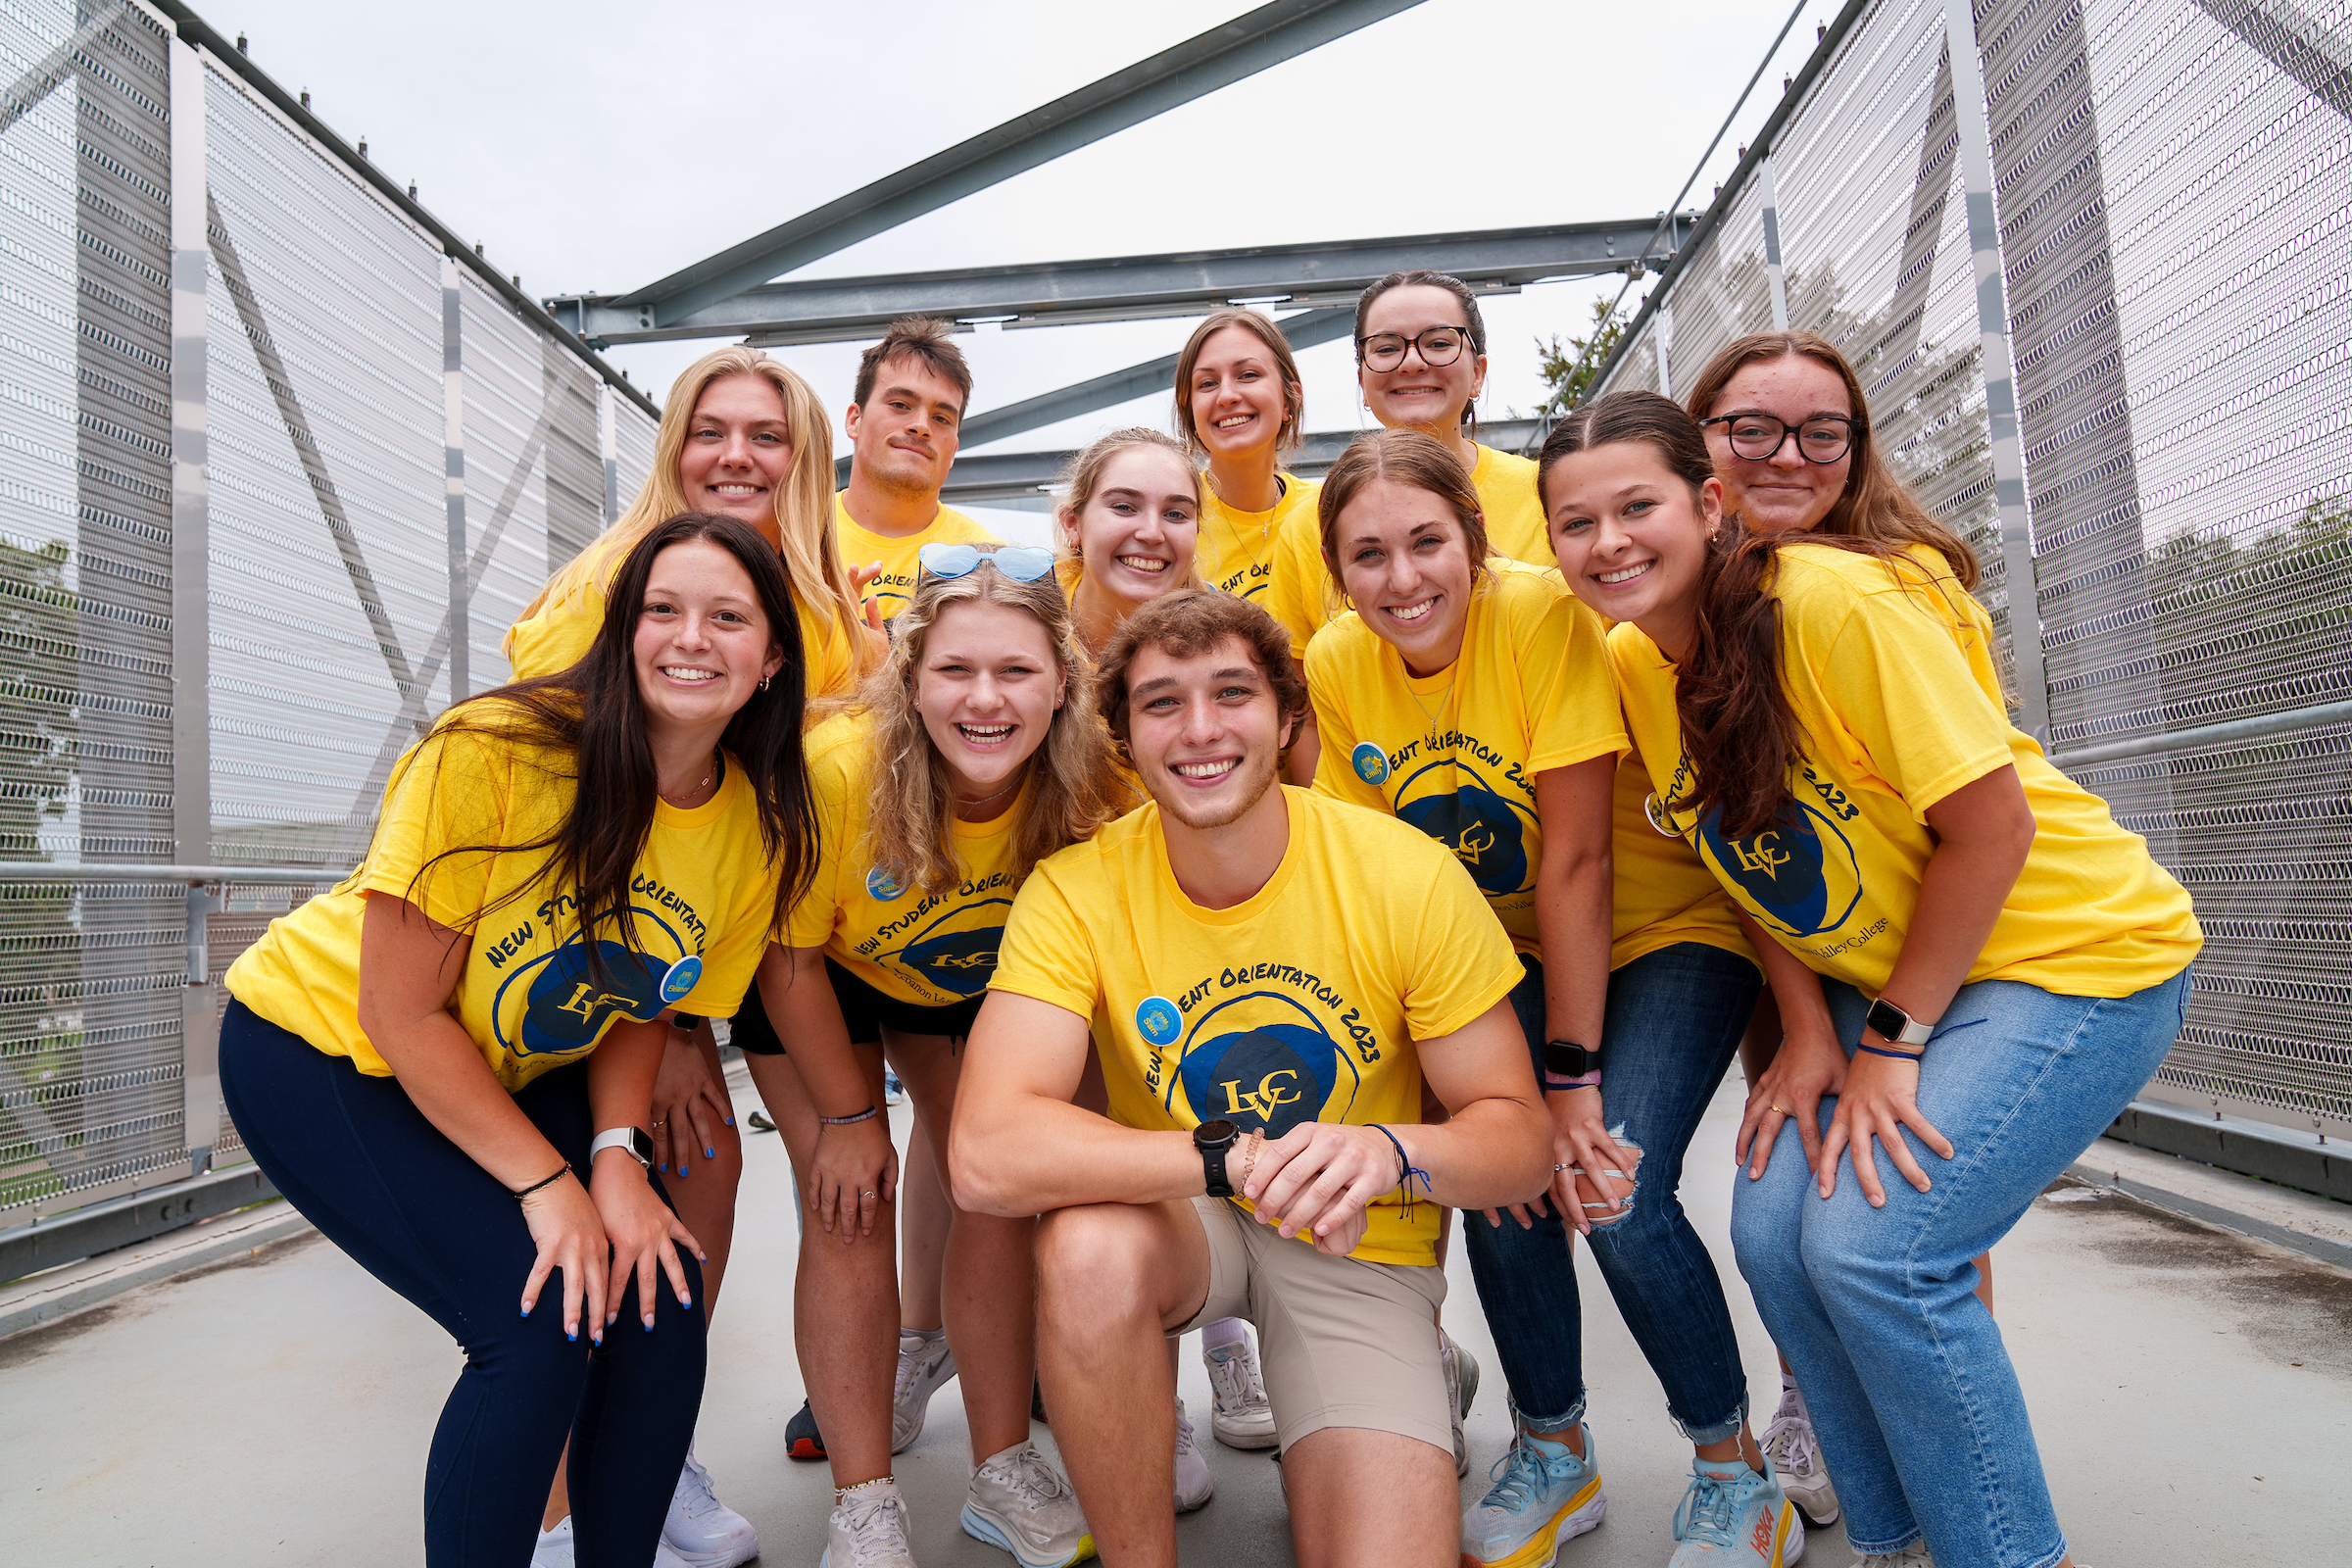 LVC First-Year Mentors pose for photo on bridge